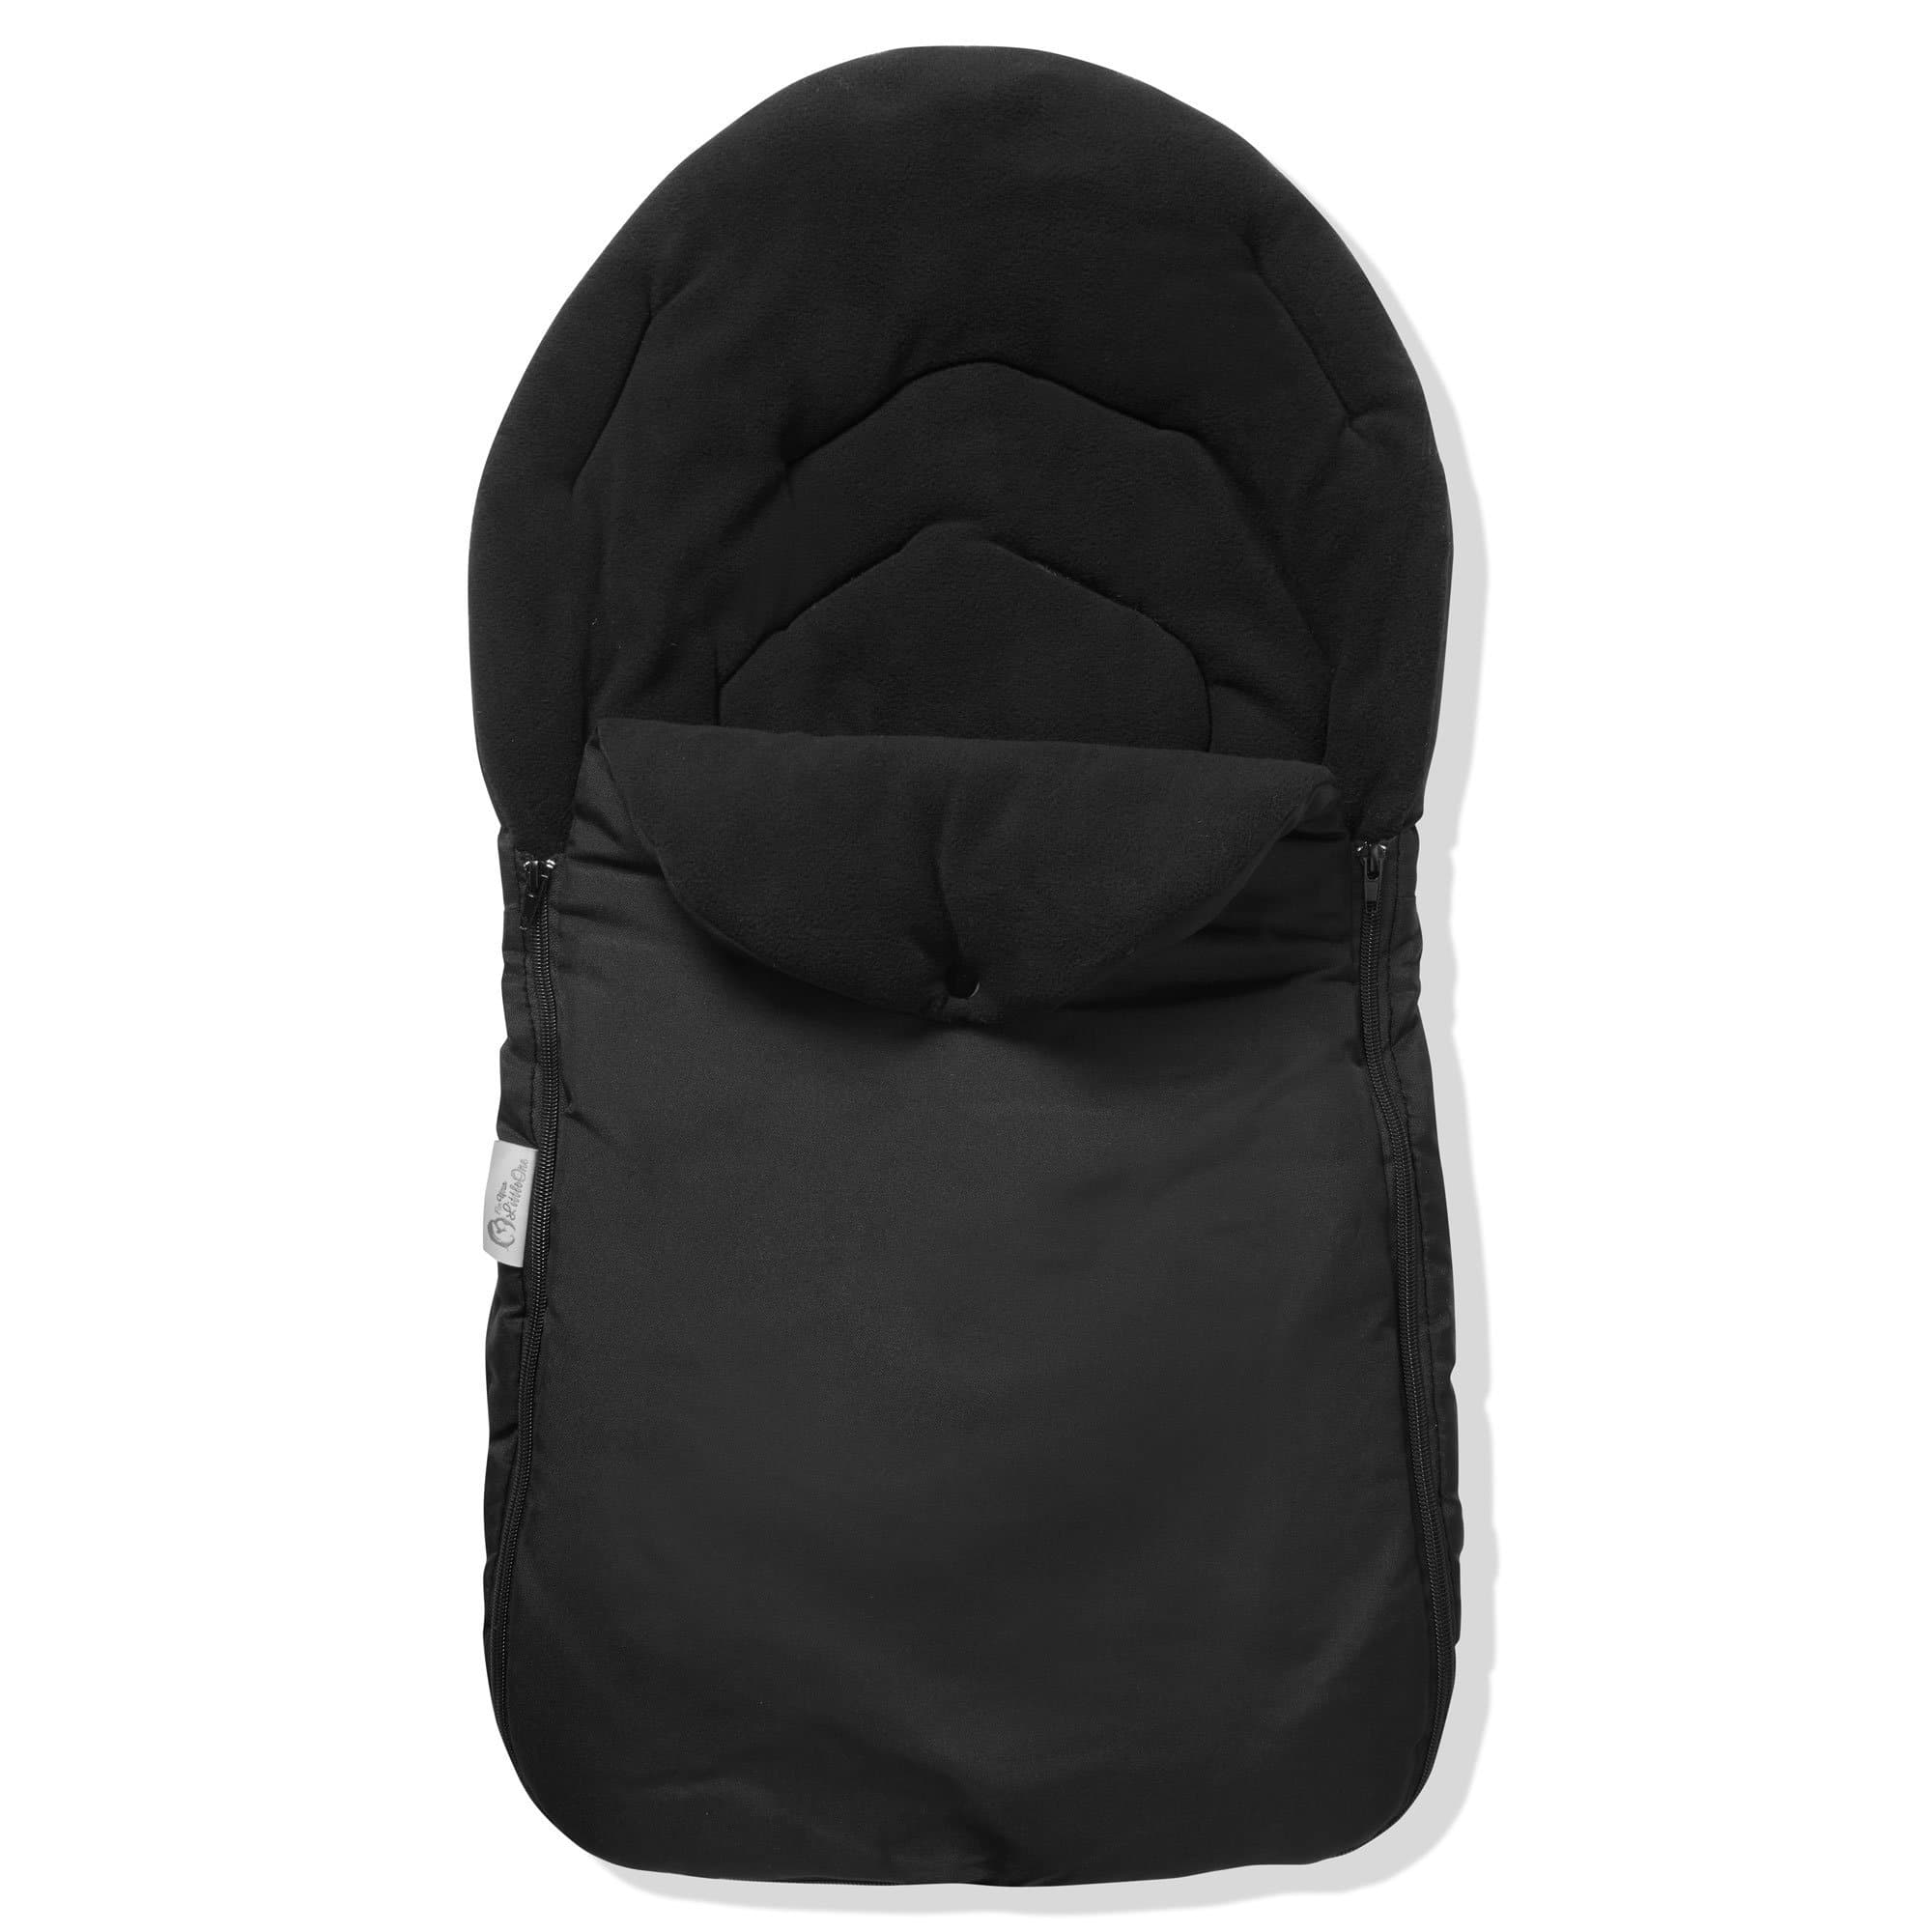 Car Seat Footmuff / Cosy Toes Compatible with Roma - Black / Fits All Models | For Your Little One